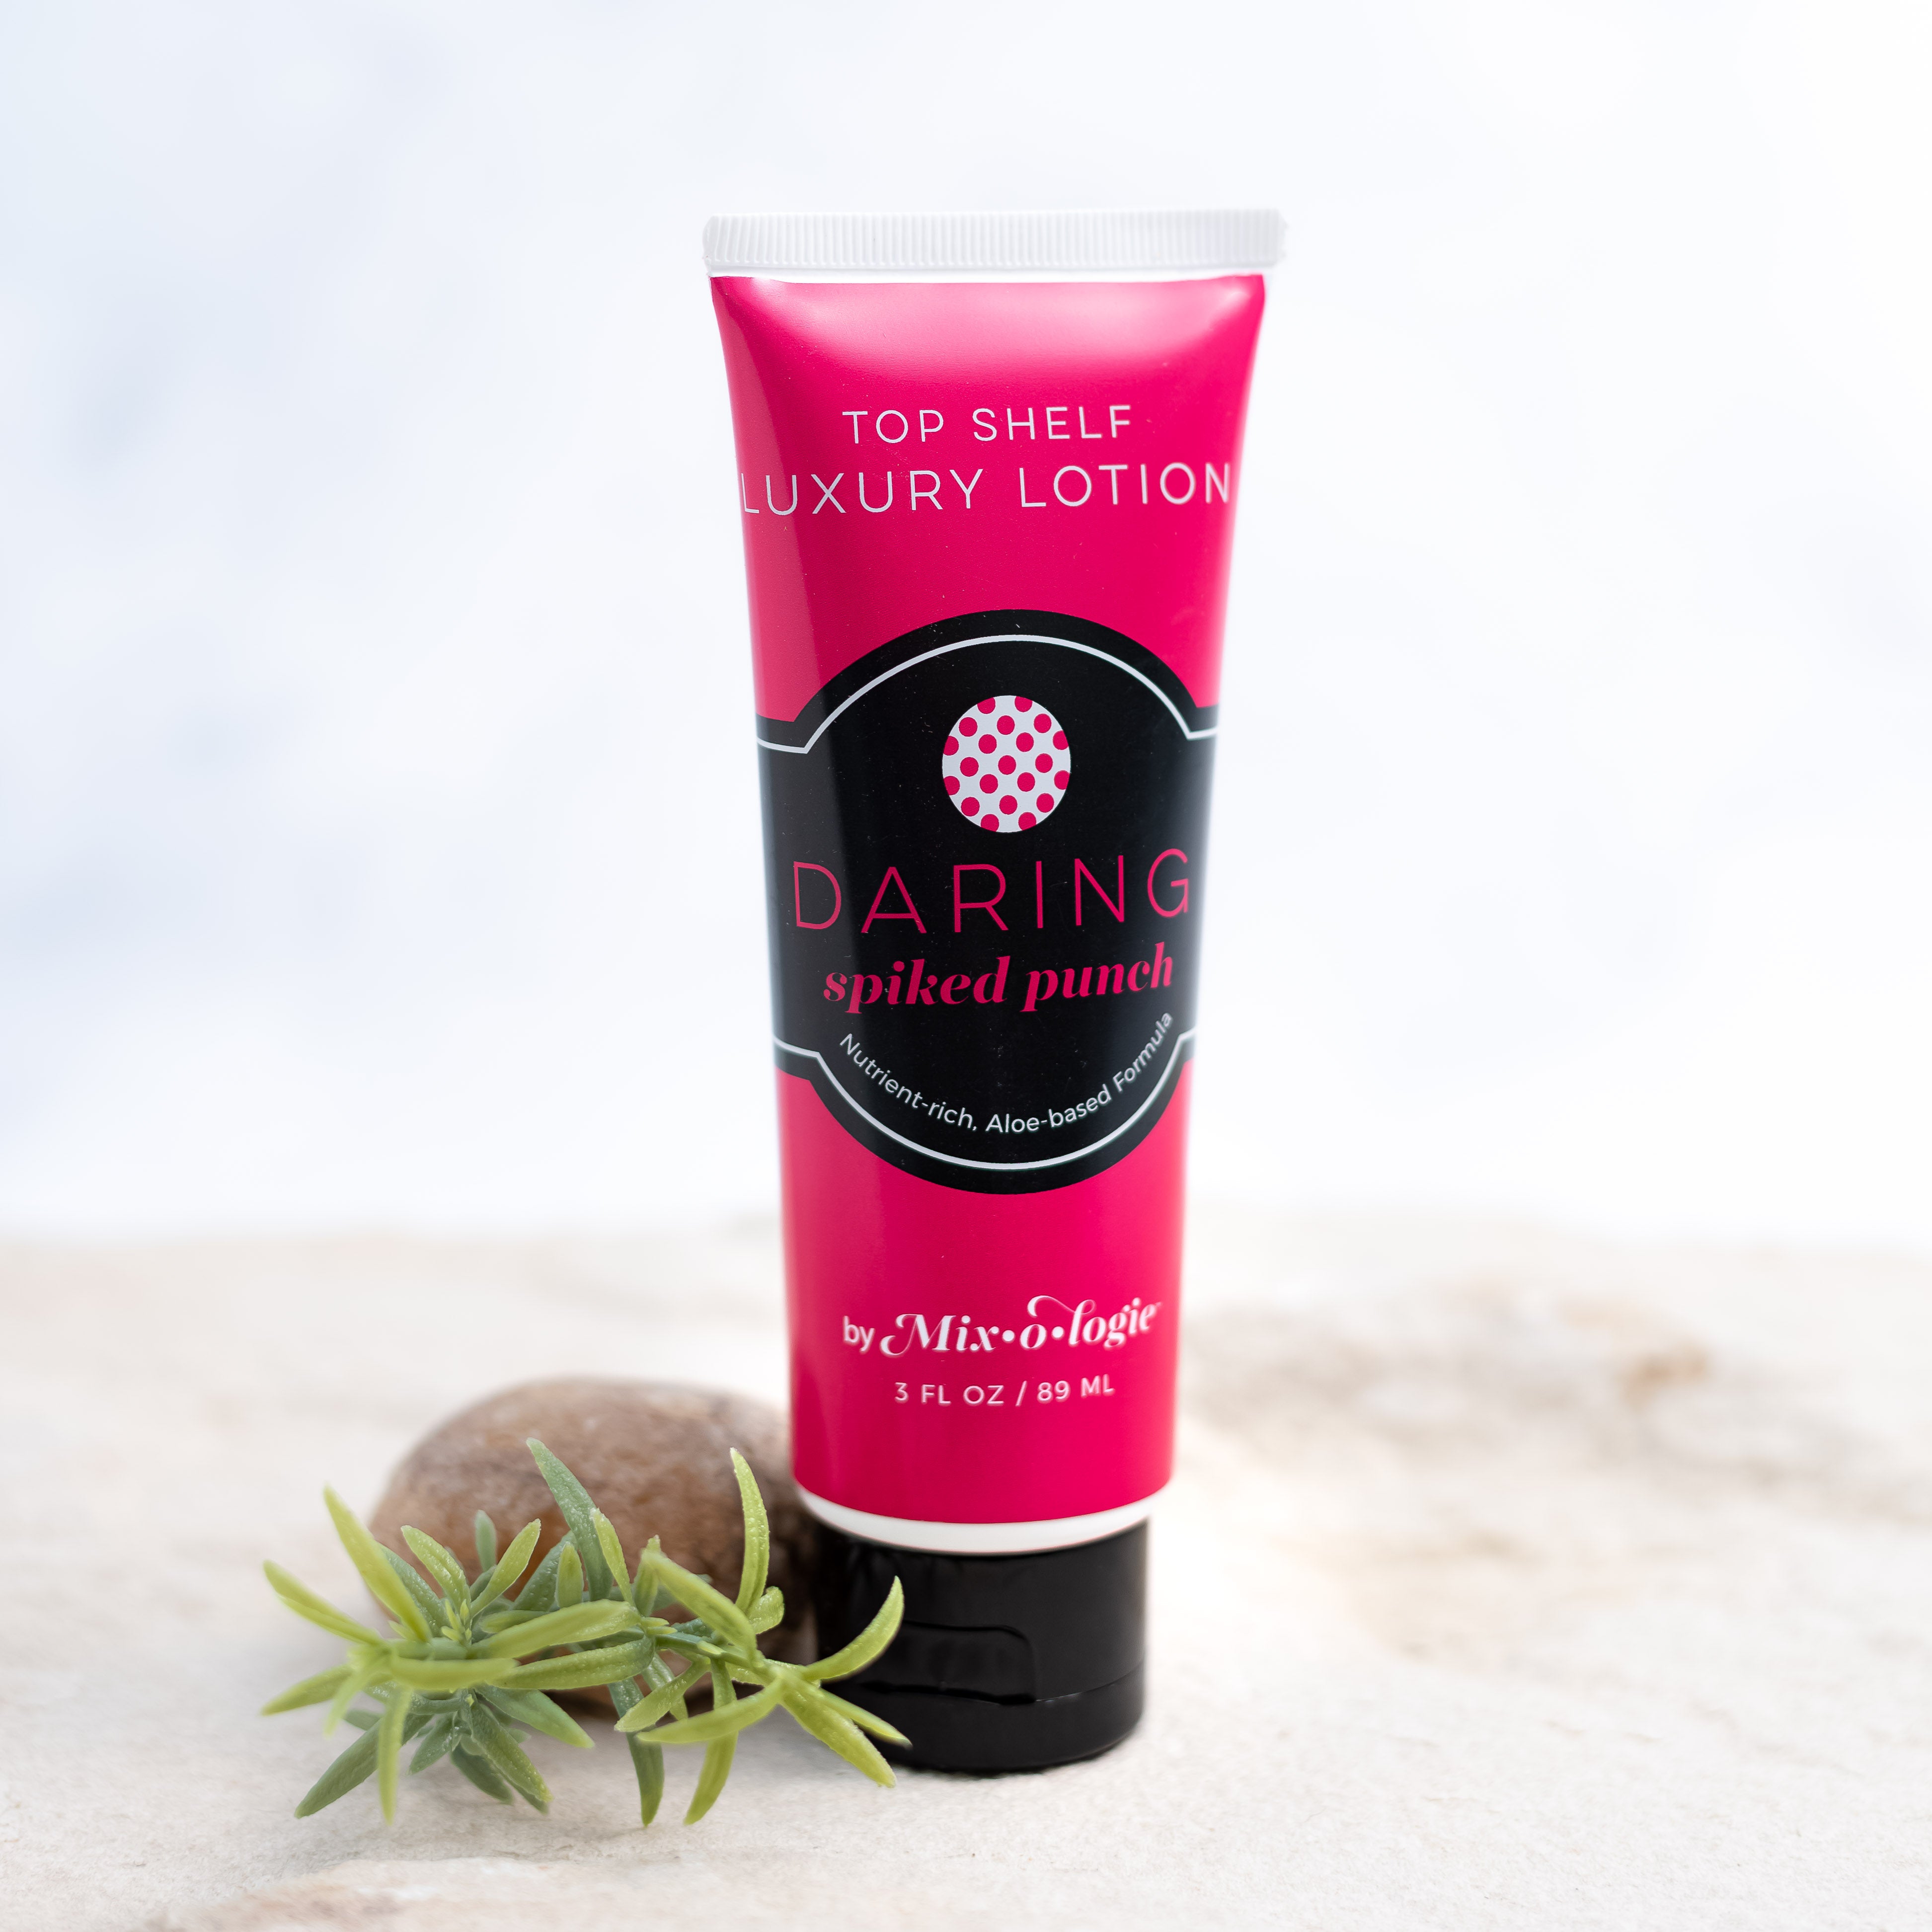 Daring (Spiked Punch) Top Shelf Lotion in bright pink tube with black lid and label. Nutrient rich, aloe-based formula, tube has 5 fl oz or 89 mL.